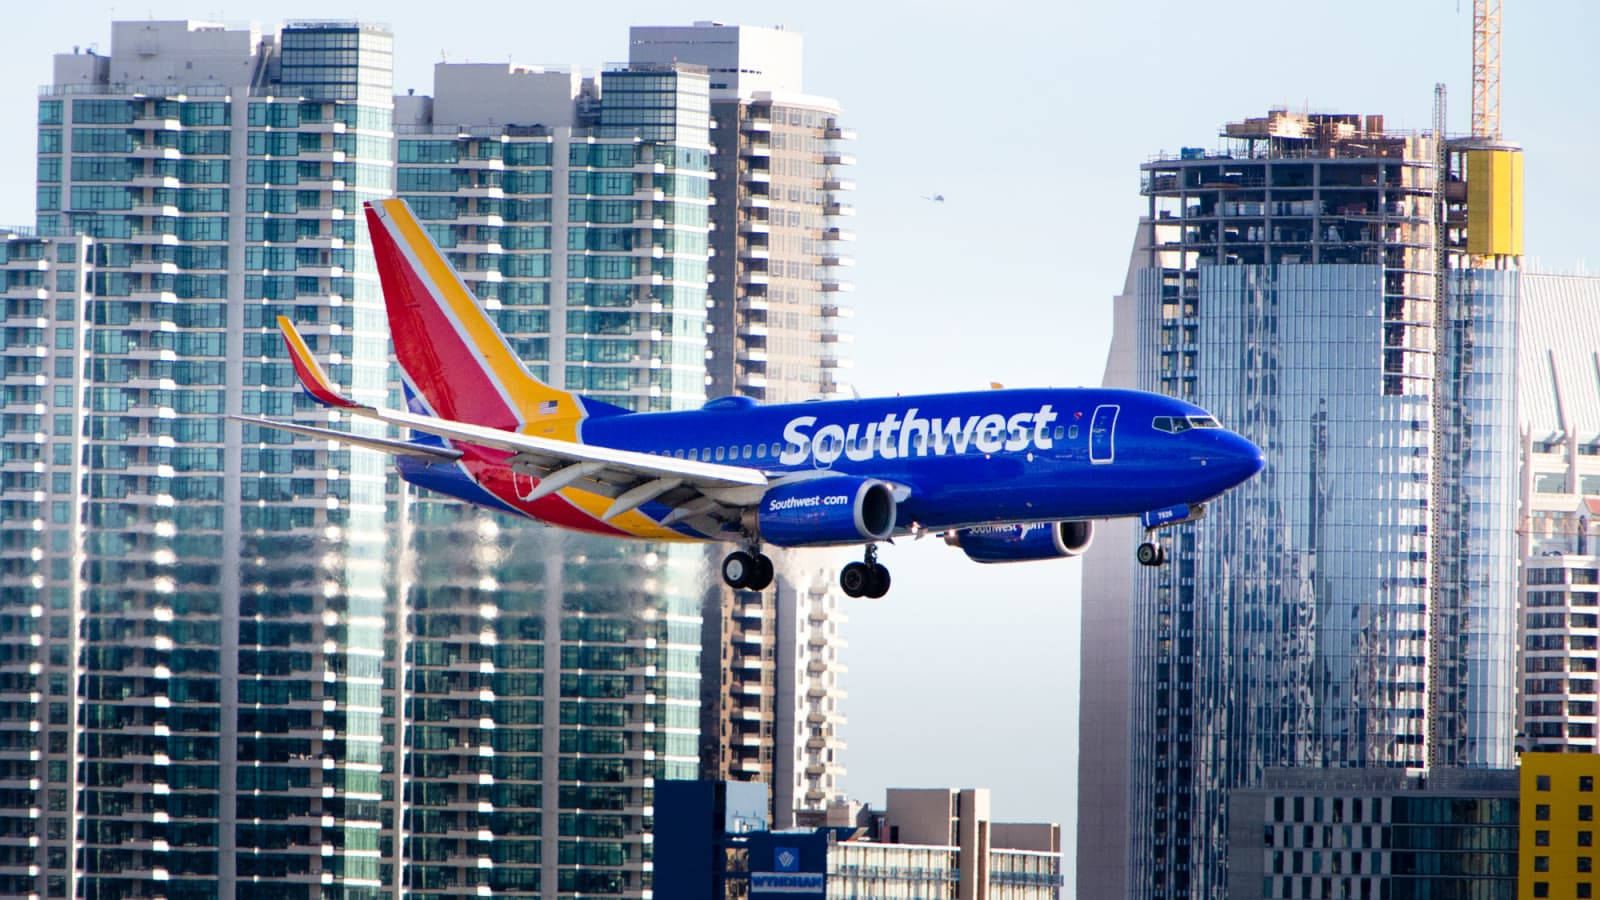 Southwest Airlines Aircraft Cityscape Wallpaper